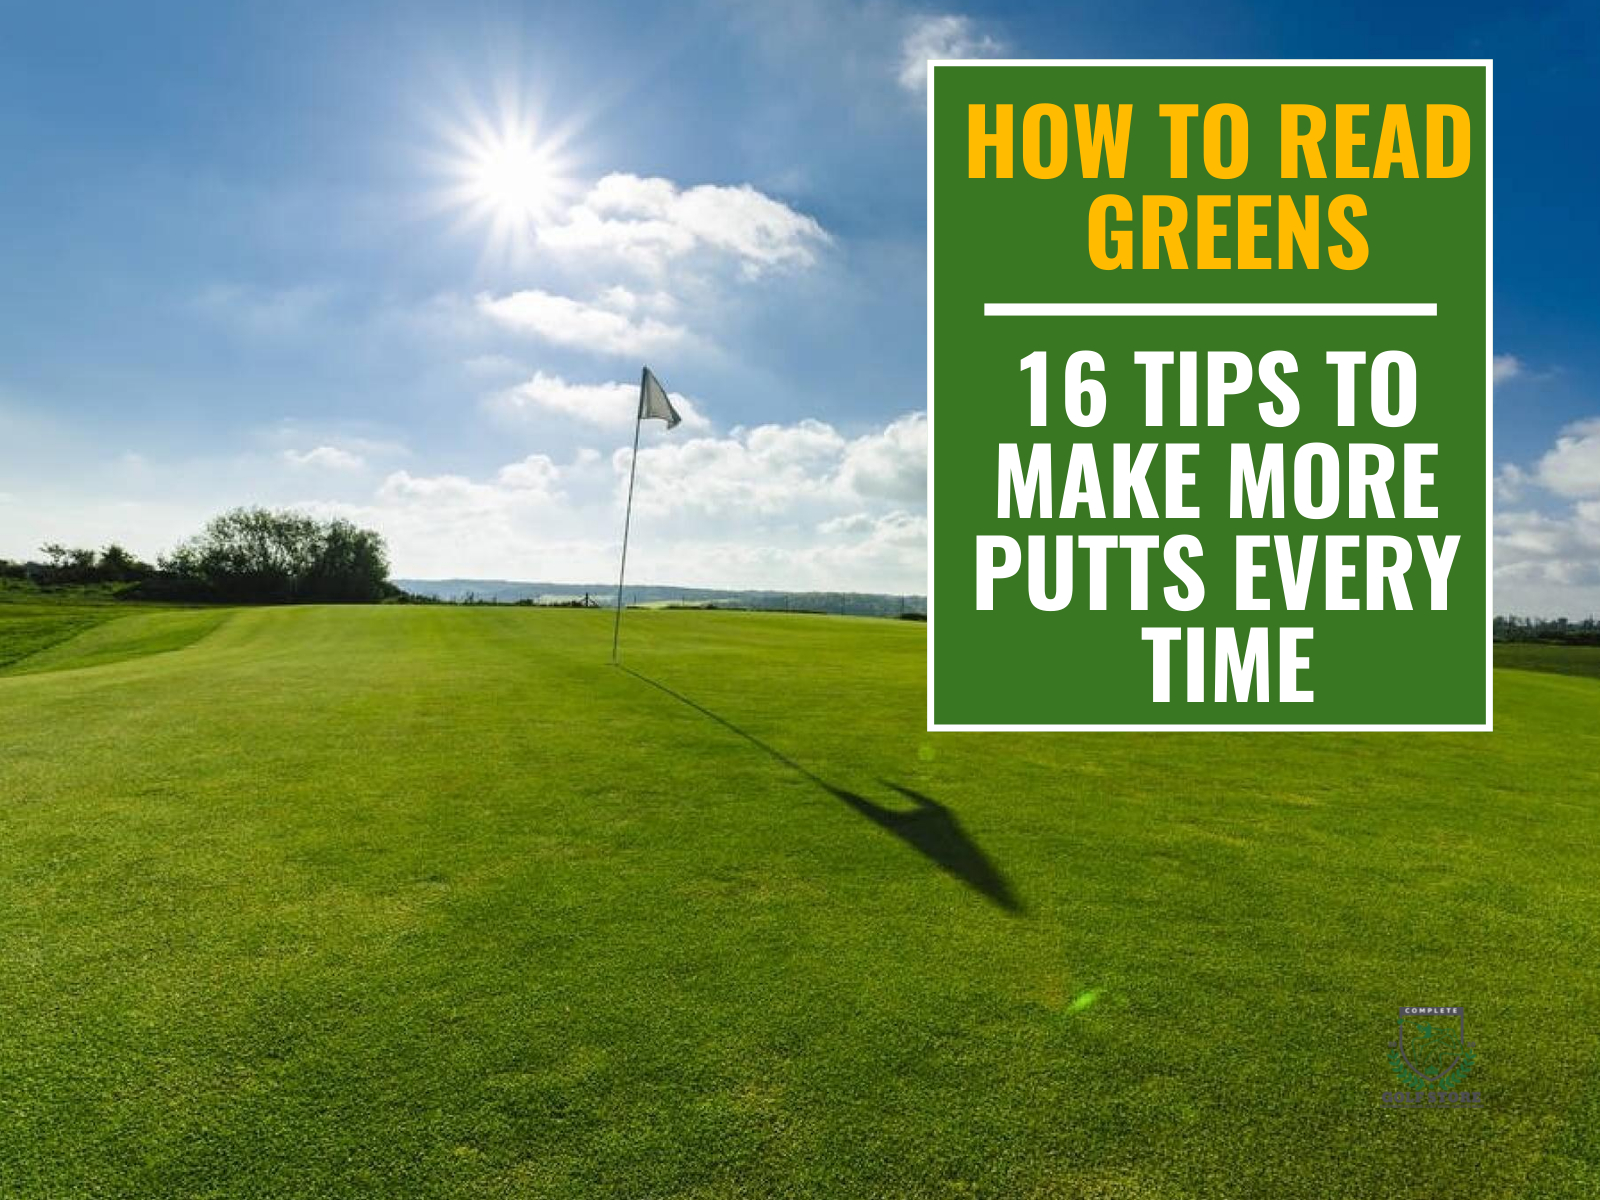 how to read greens 16 tips to make more putts every time